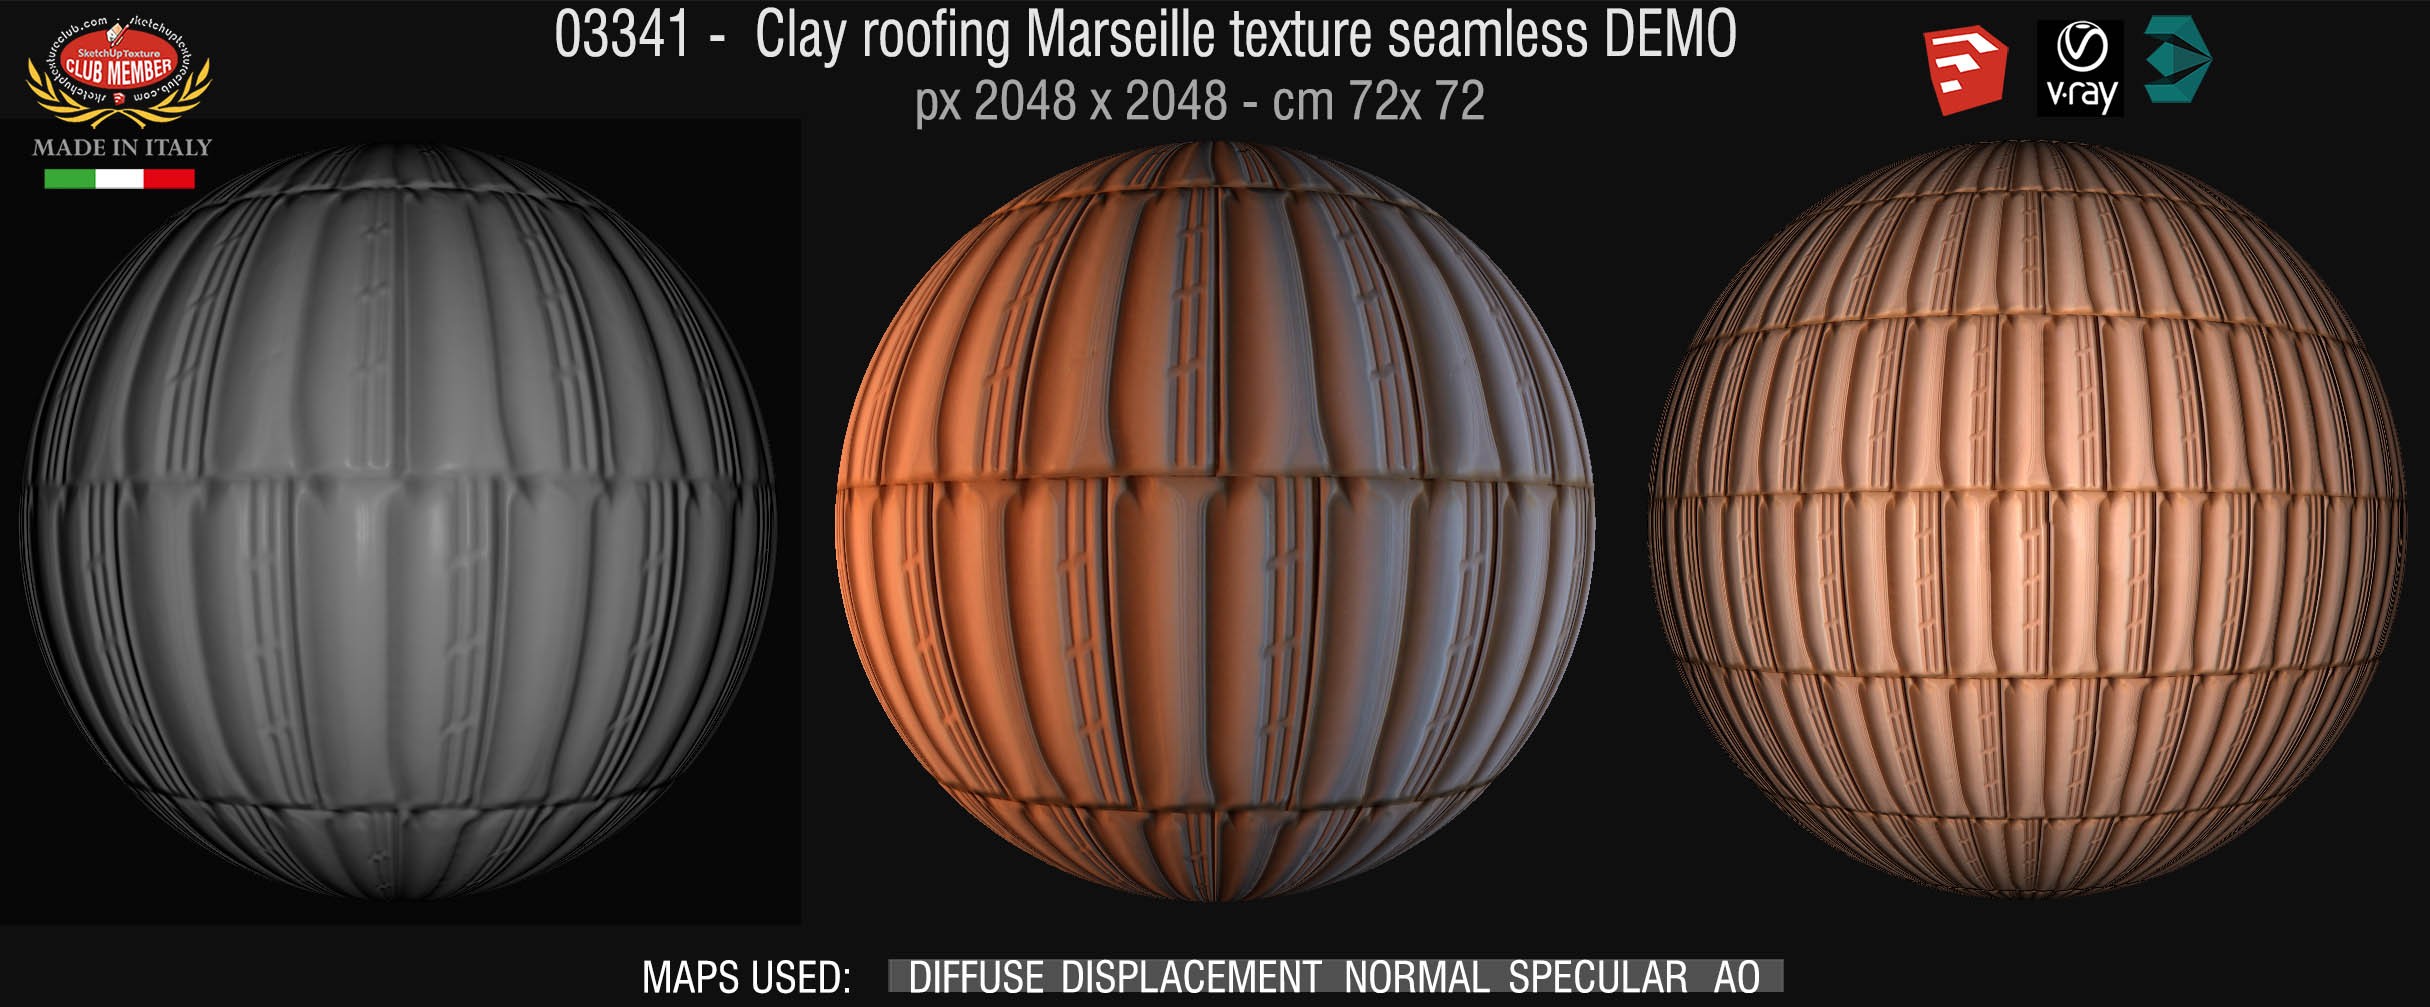 03341 Clay roofing Marseille texture seamless + maps DEMO